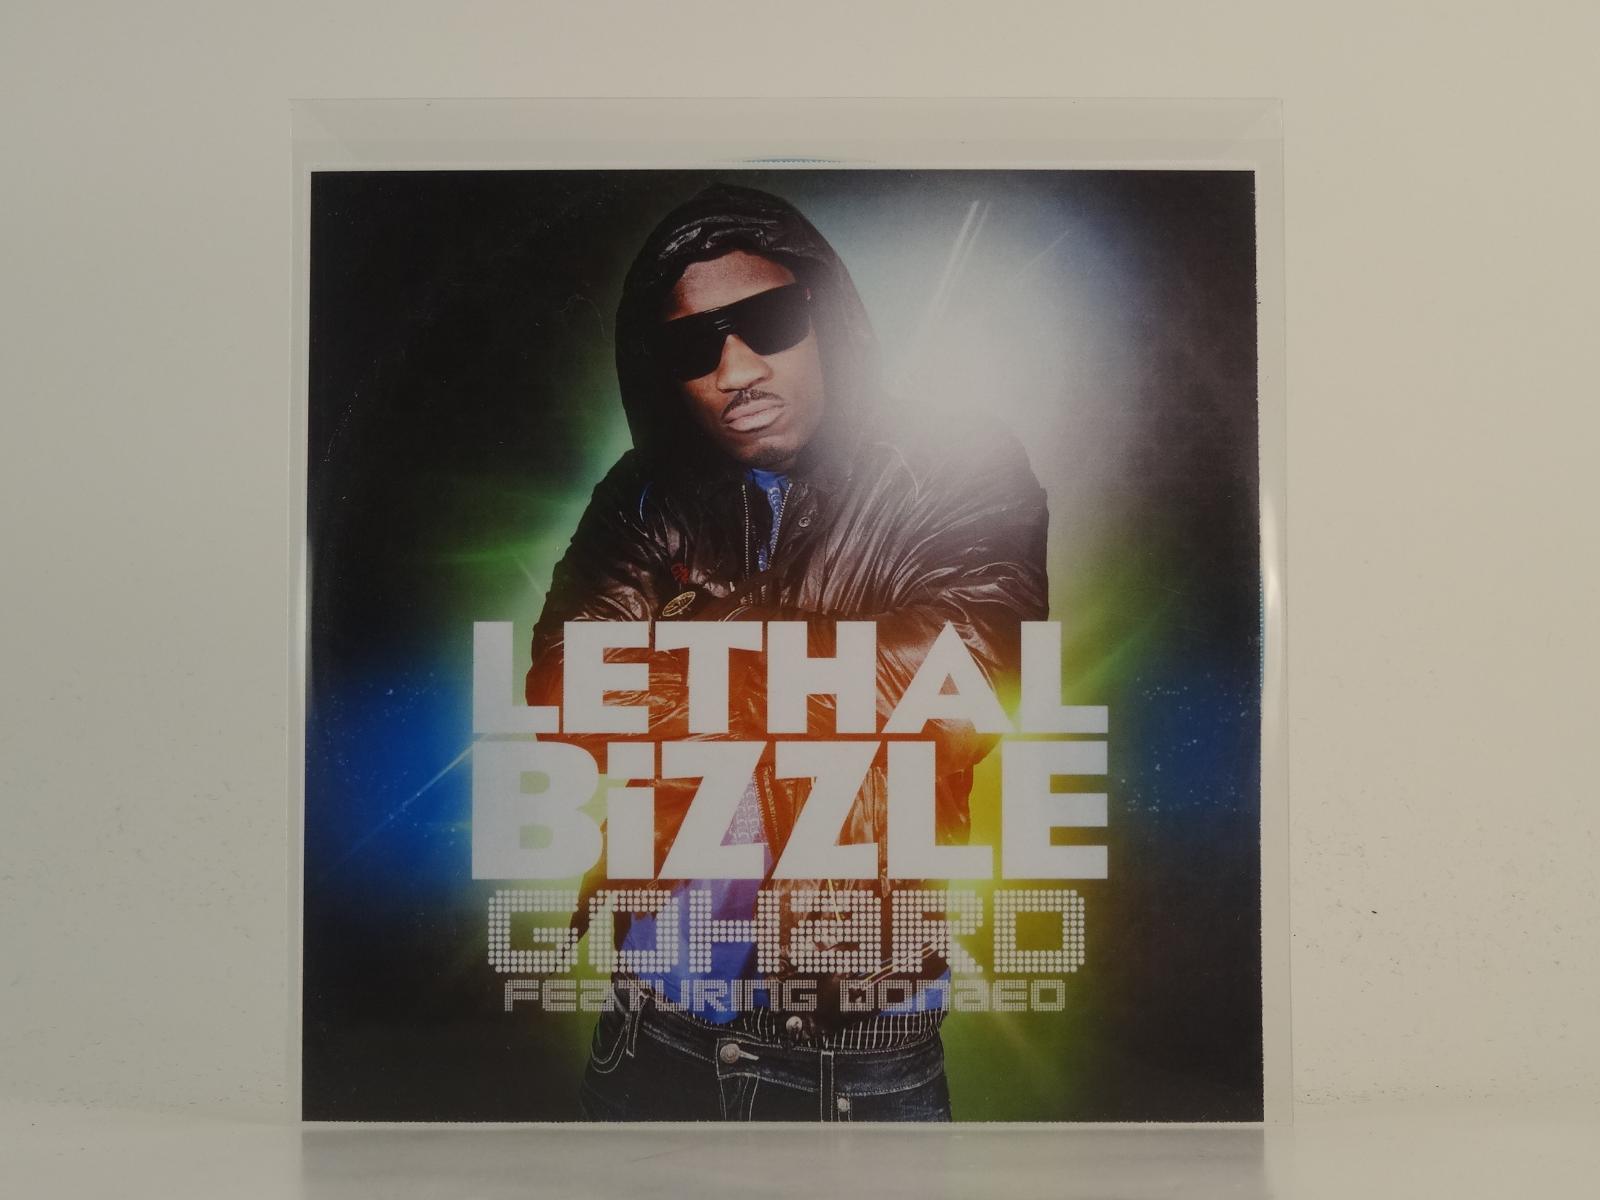 LETHAL BIZZLE FT DONAEO GO HARD (H1) 1 Track Promo CD Single Picture Sleeve SEAR